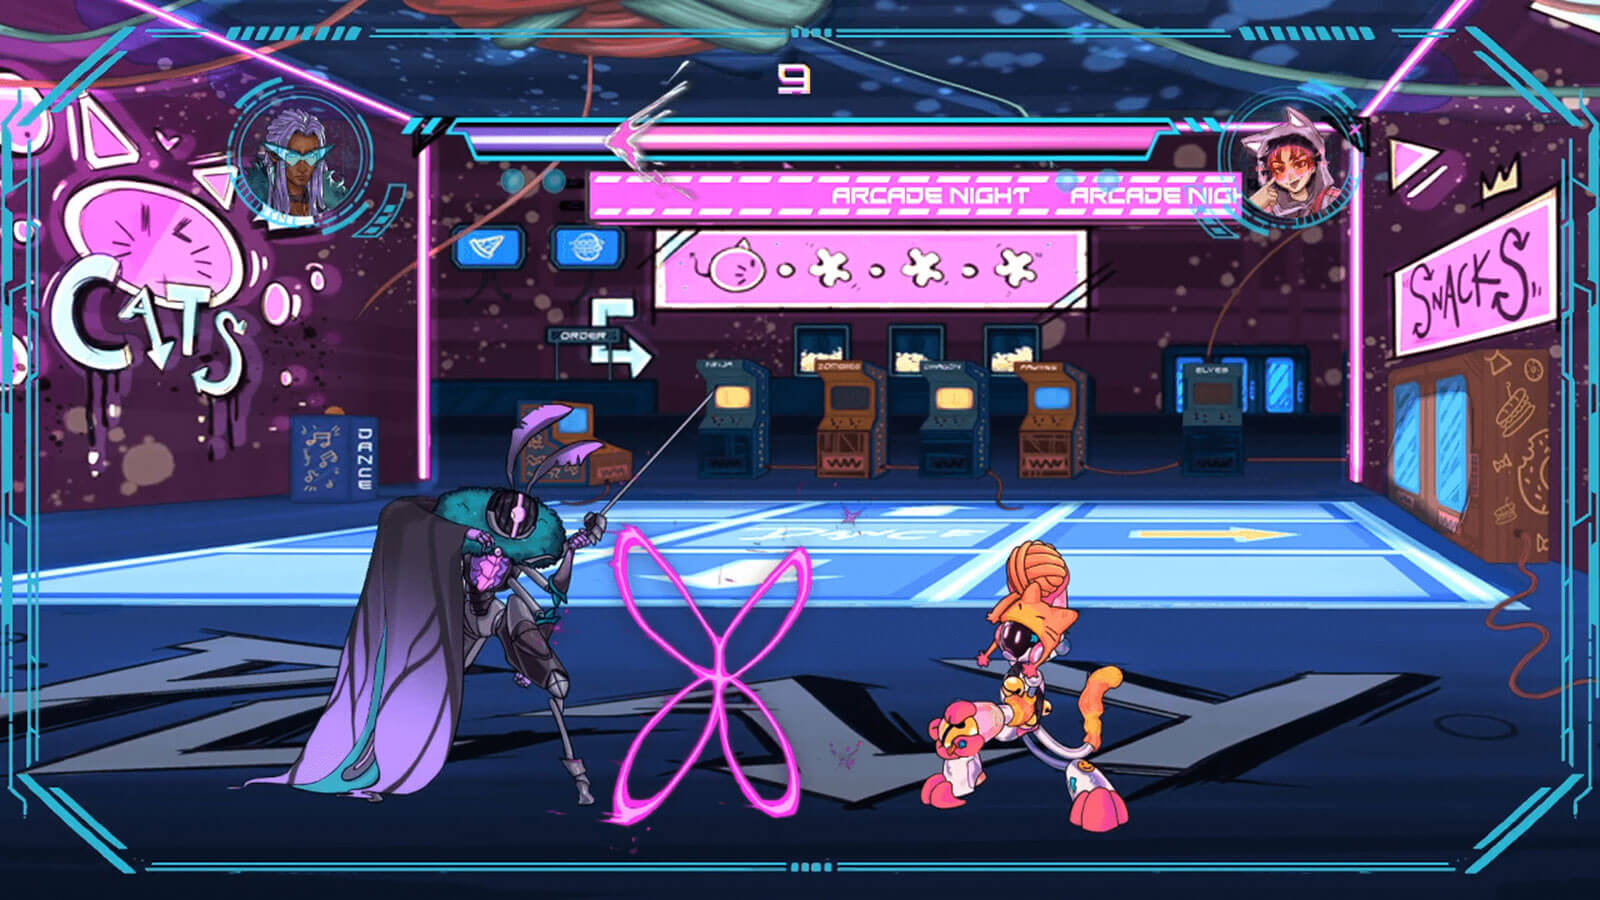 Kai and Aylo are fighting in the arcade zone.